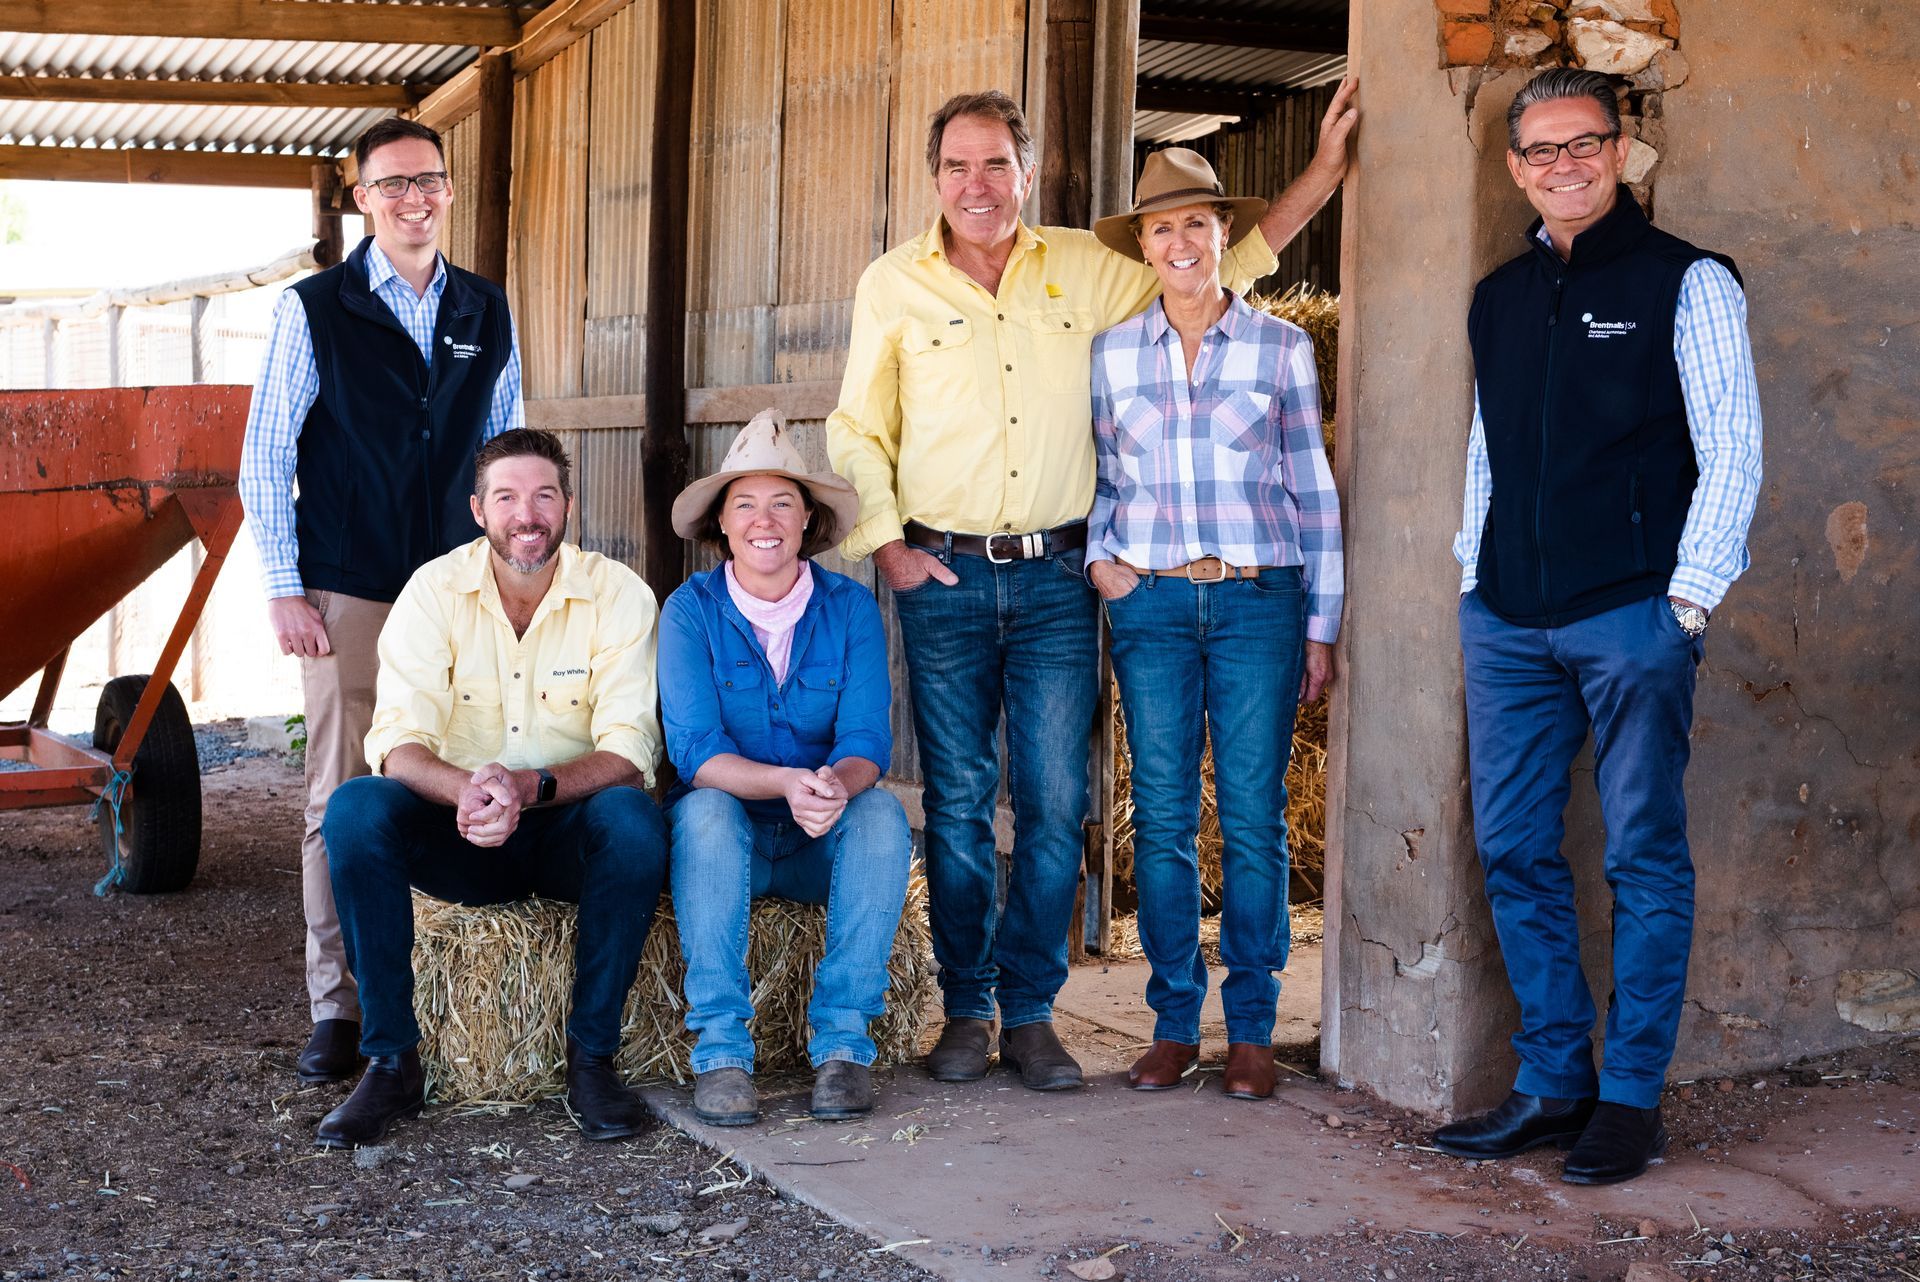 Schell Family farmers standing with Rick Albertini, Partner and Bradley Barnes Partner on their family farm.